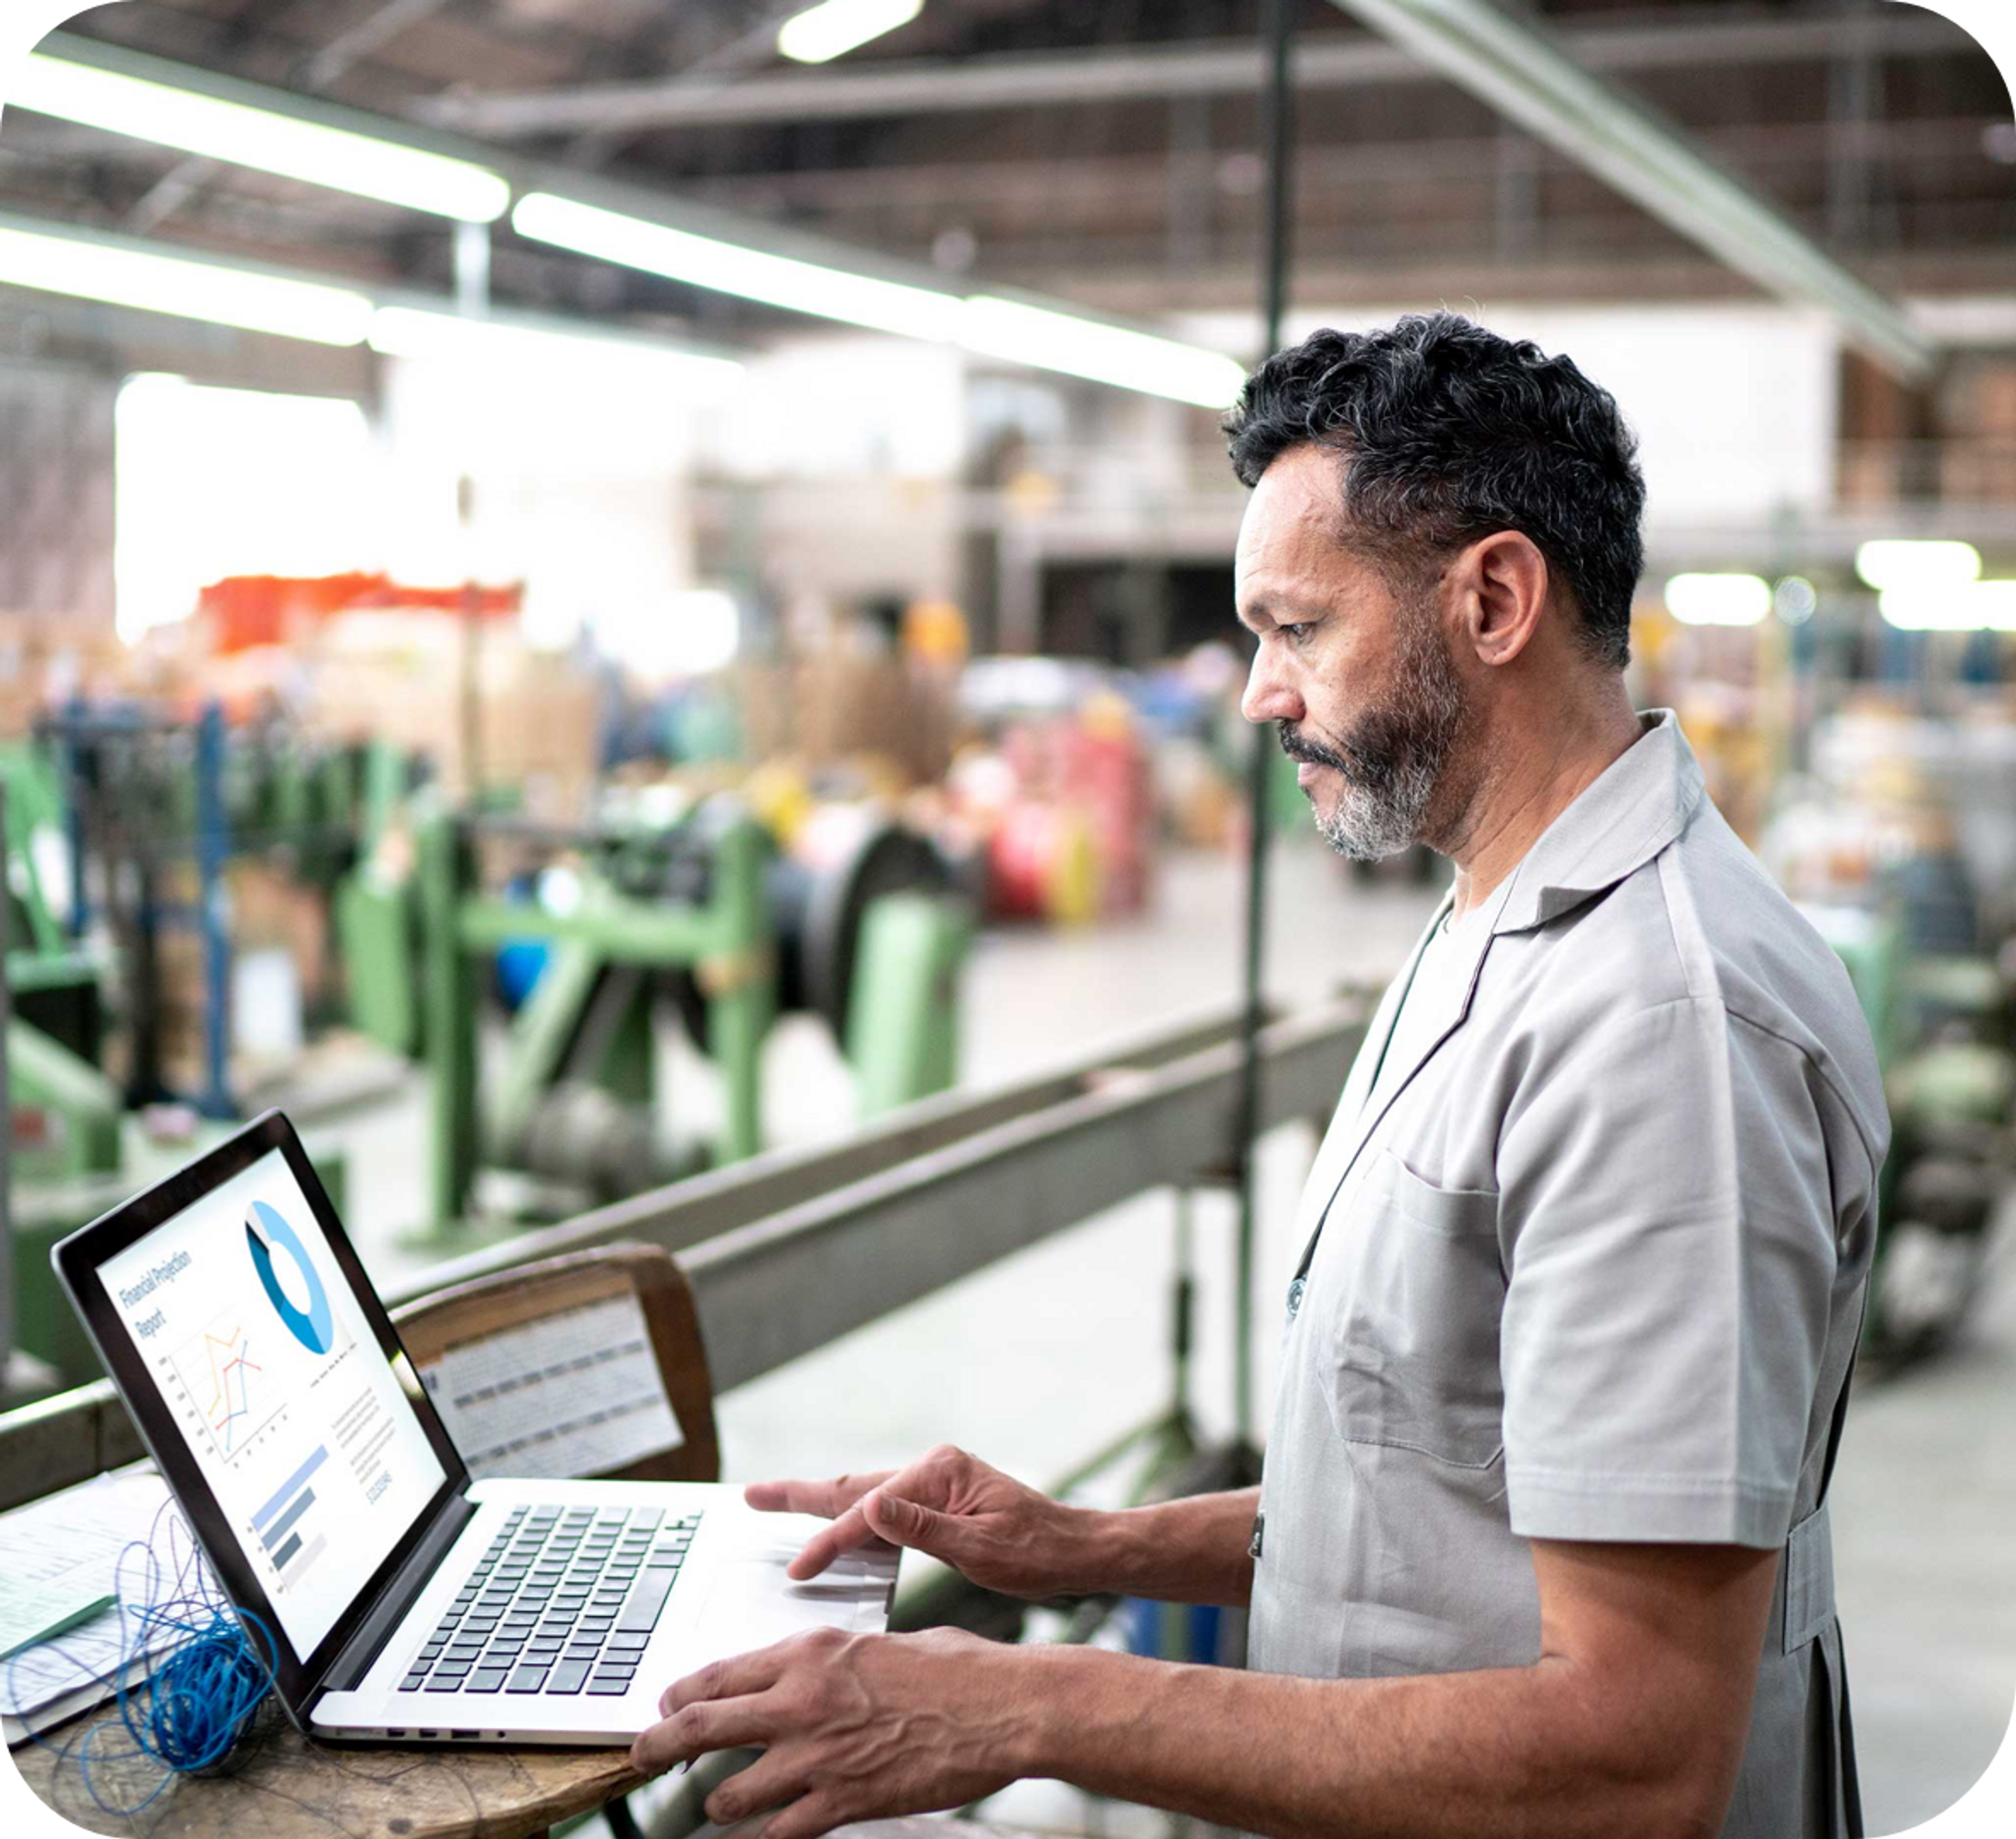 Picture of middle aged man with back and silver beard and white dress shirt using a laptop in a warehouse